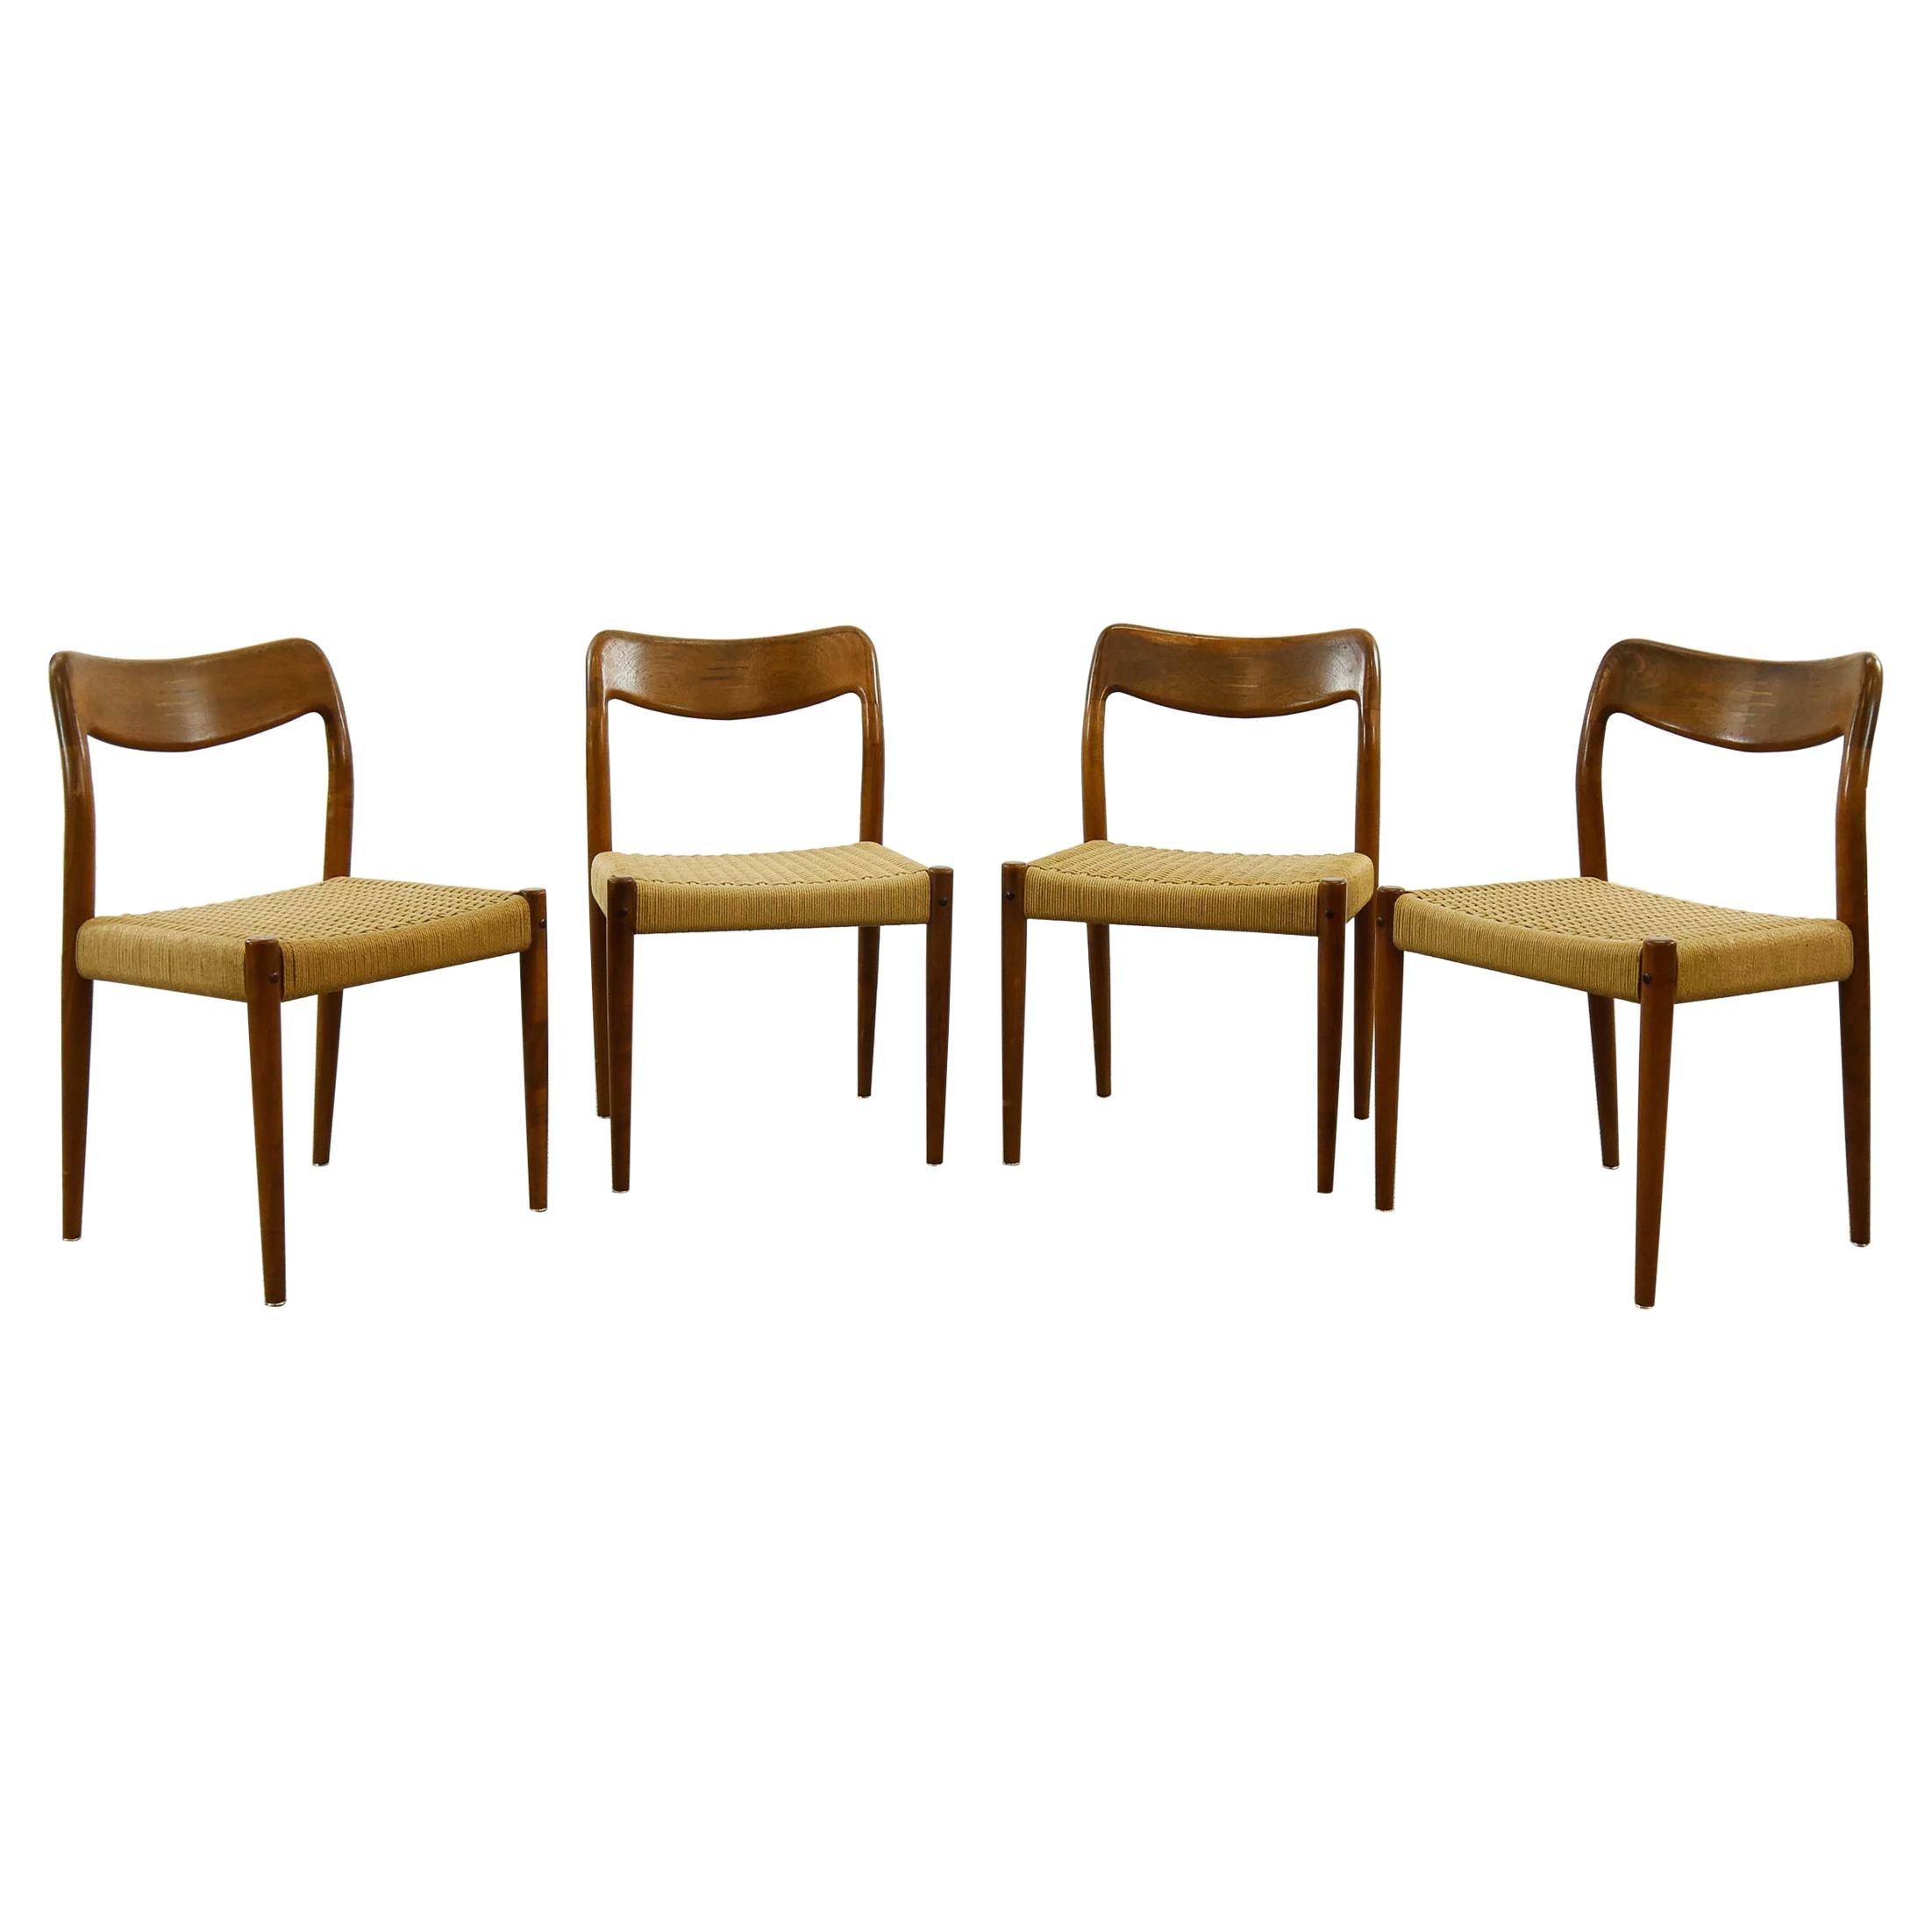 Set of 4 Teak Chairs with Papercord Seat by Johannes Andersen for Uldum, Denmark